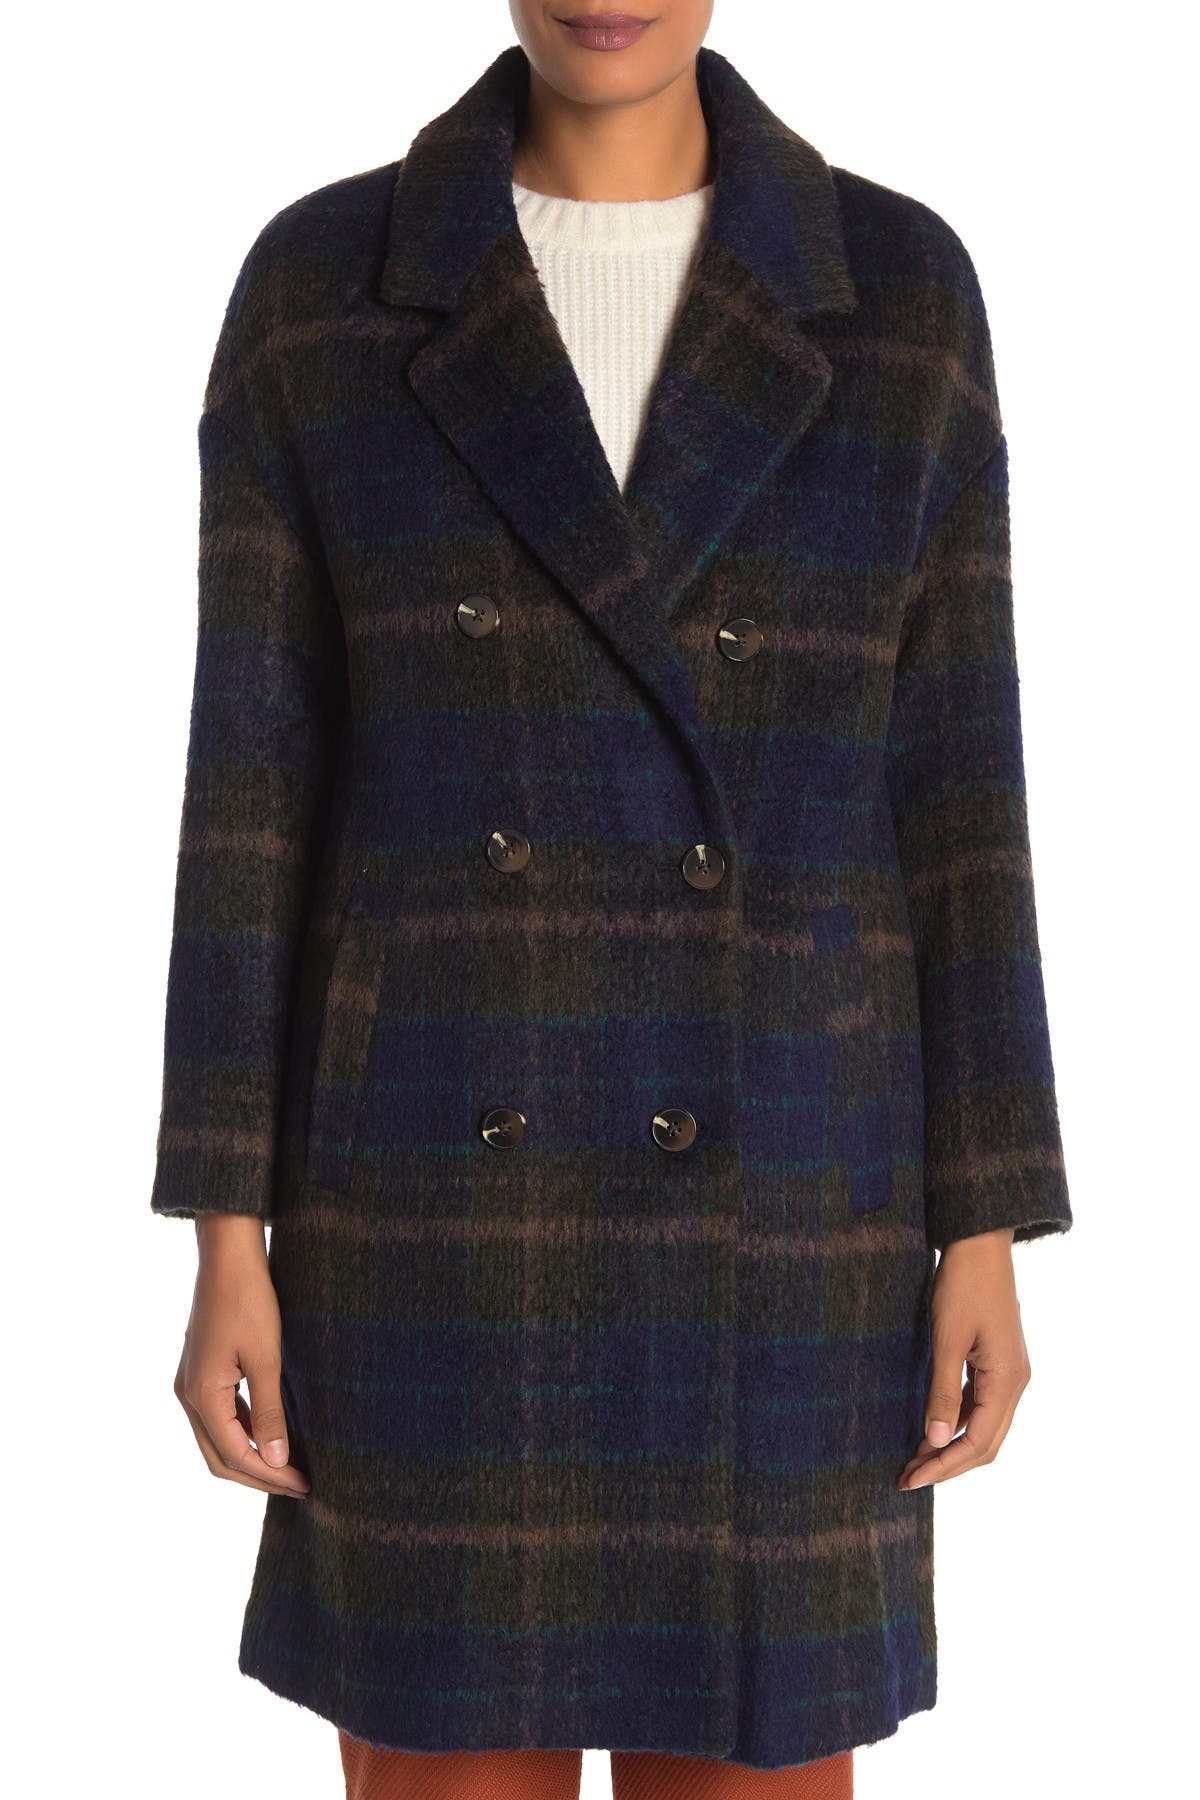 Andrew Marc | Plaid Double Breasted Coat | Nordstrom Rack